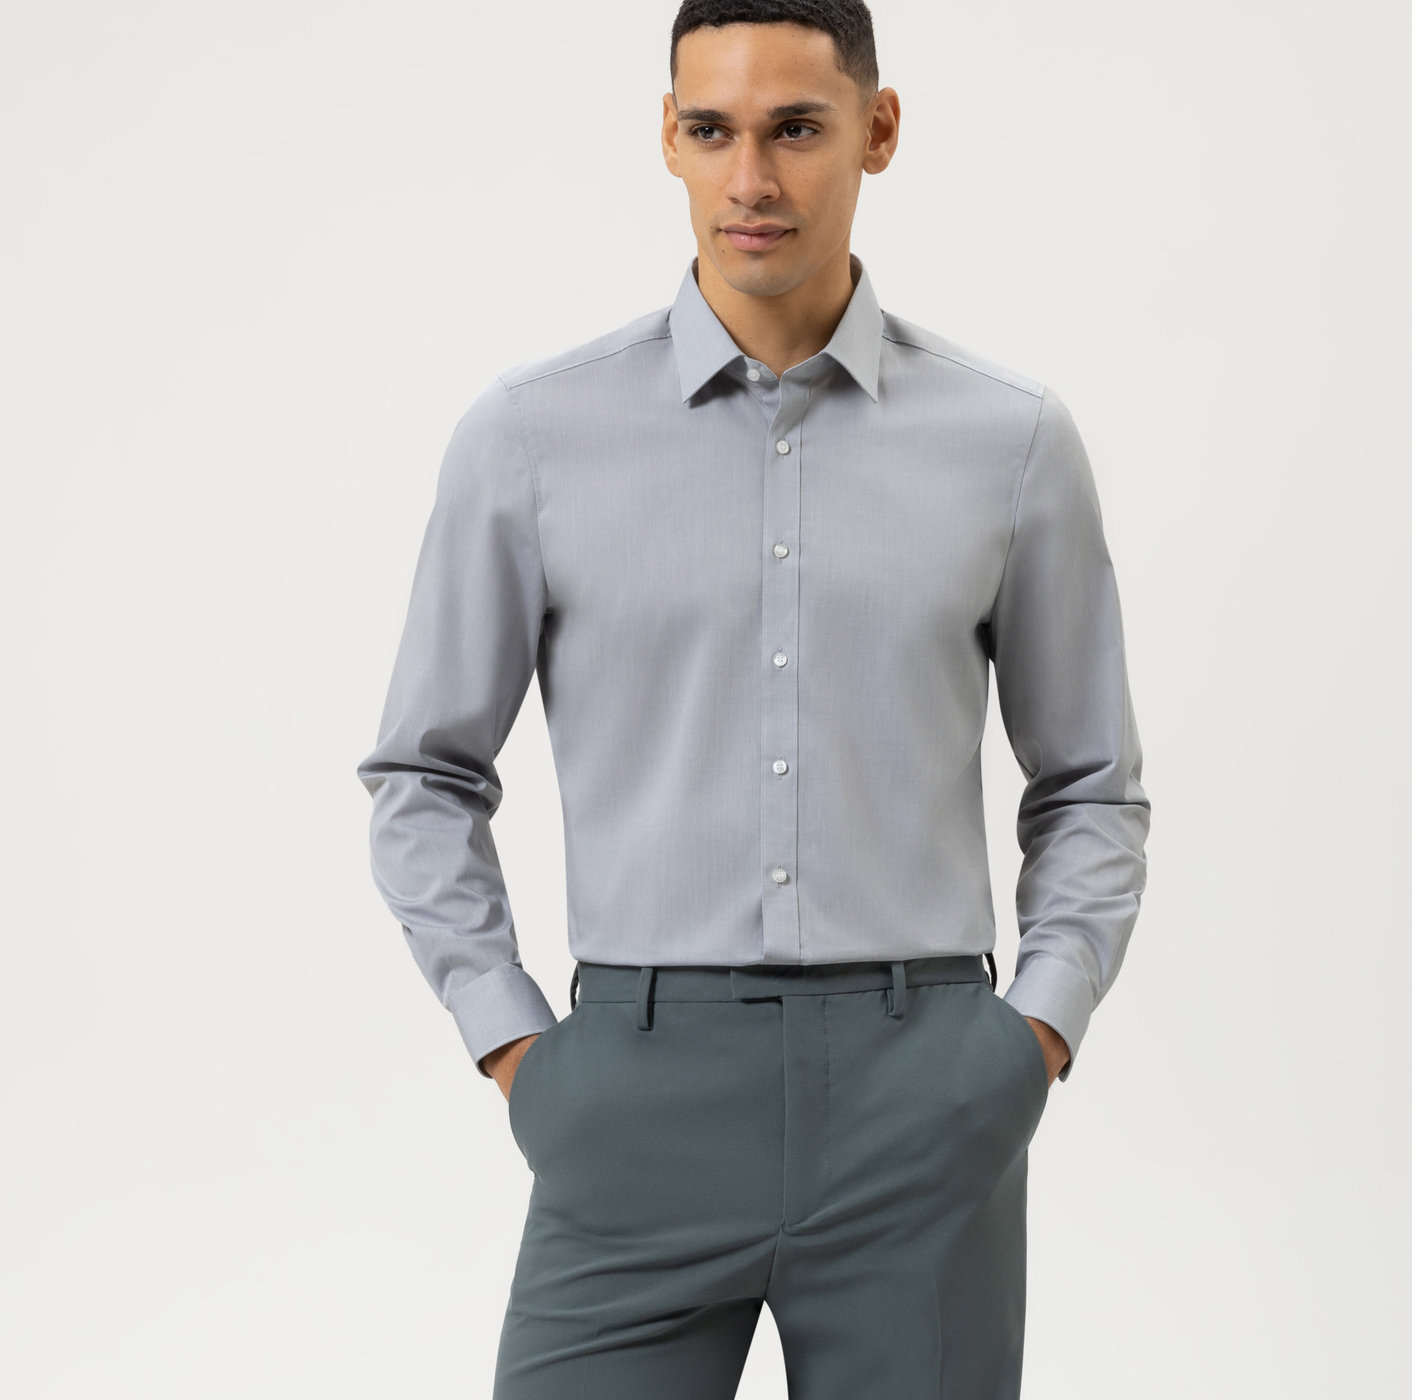 OLYMP Level Five, body fit, Business shirt, New York Kent, Gris Souris